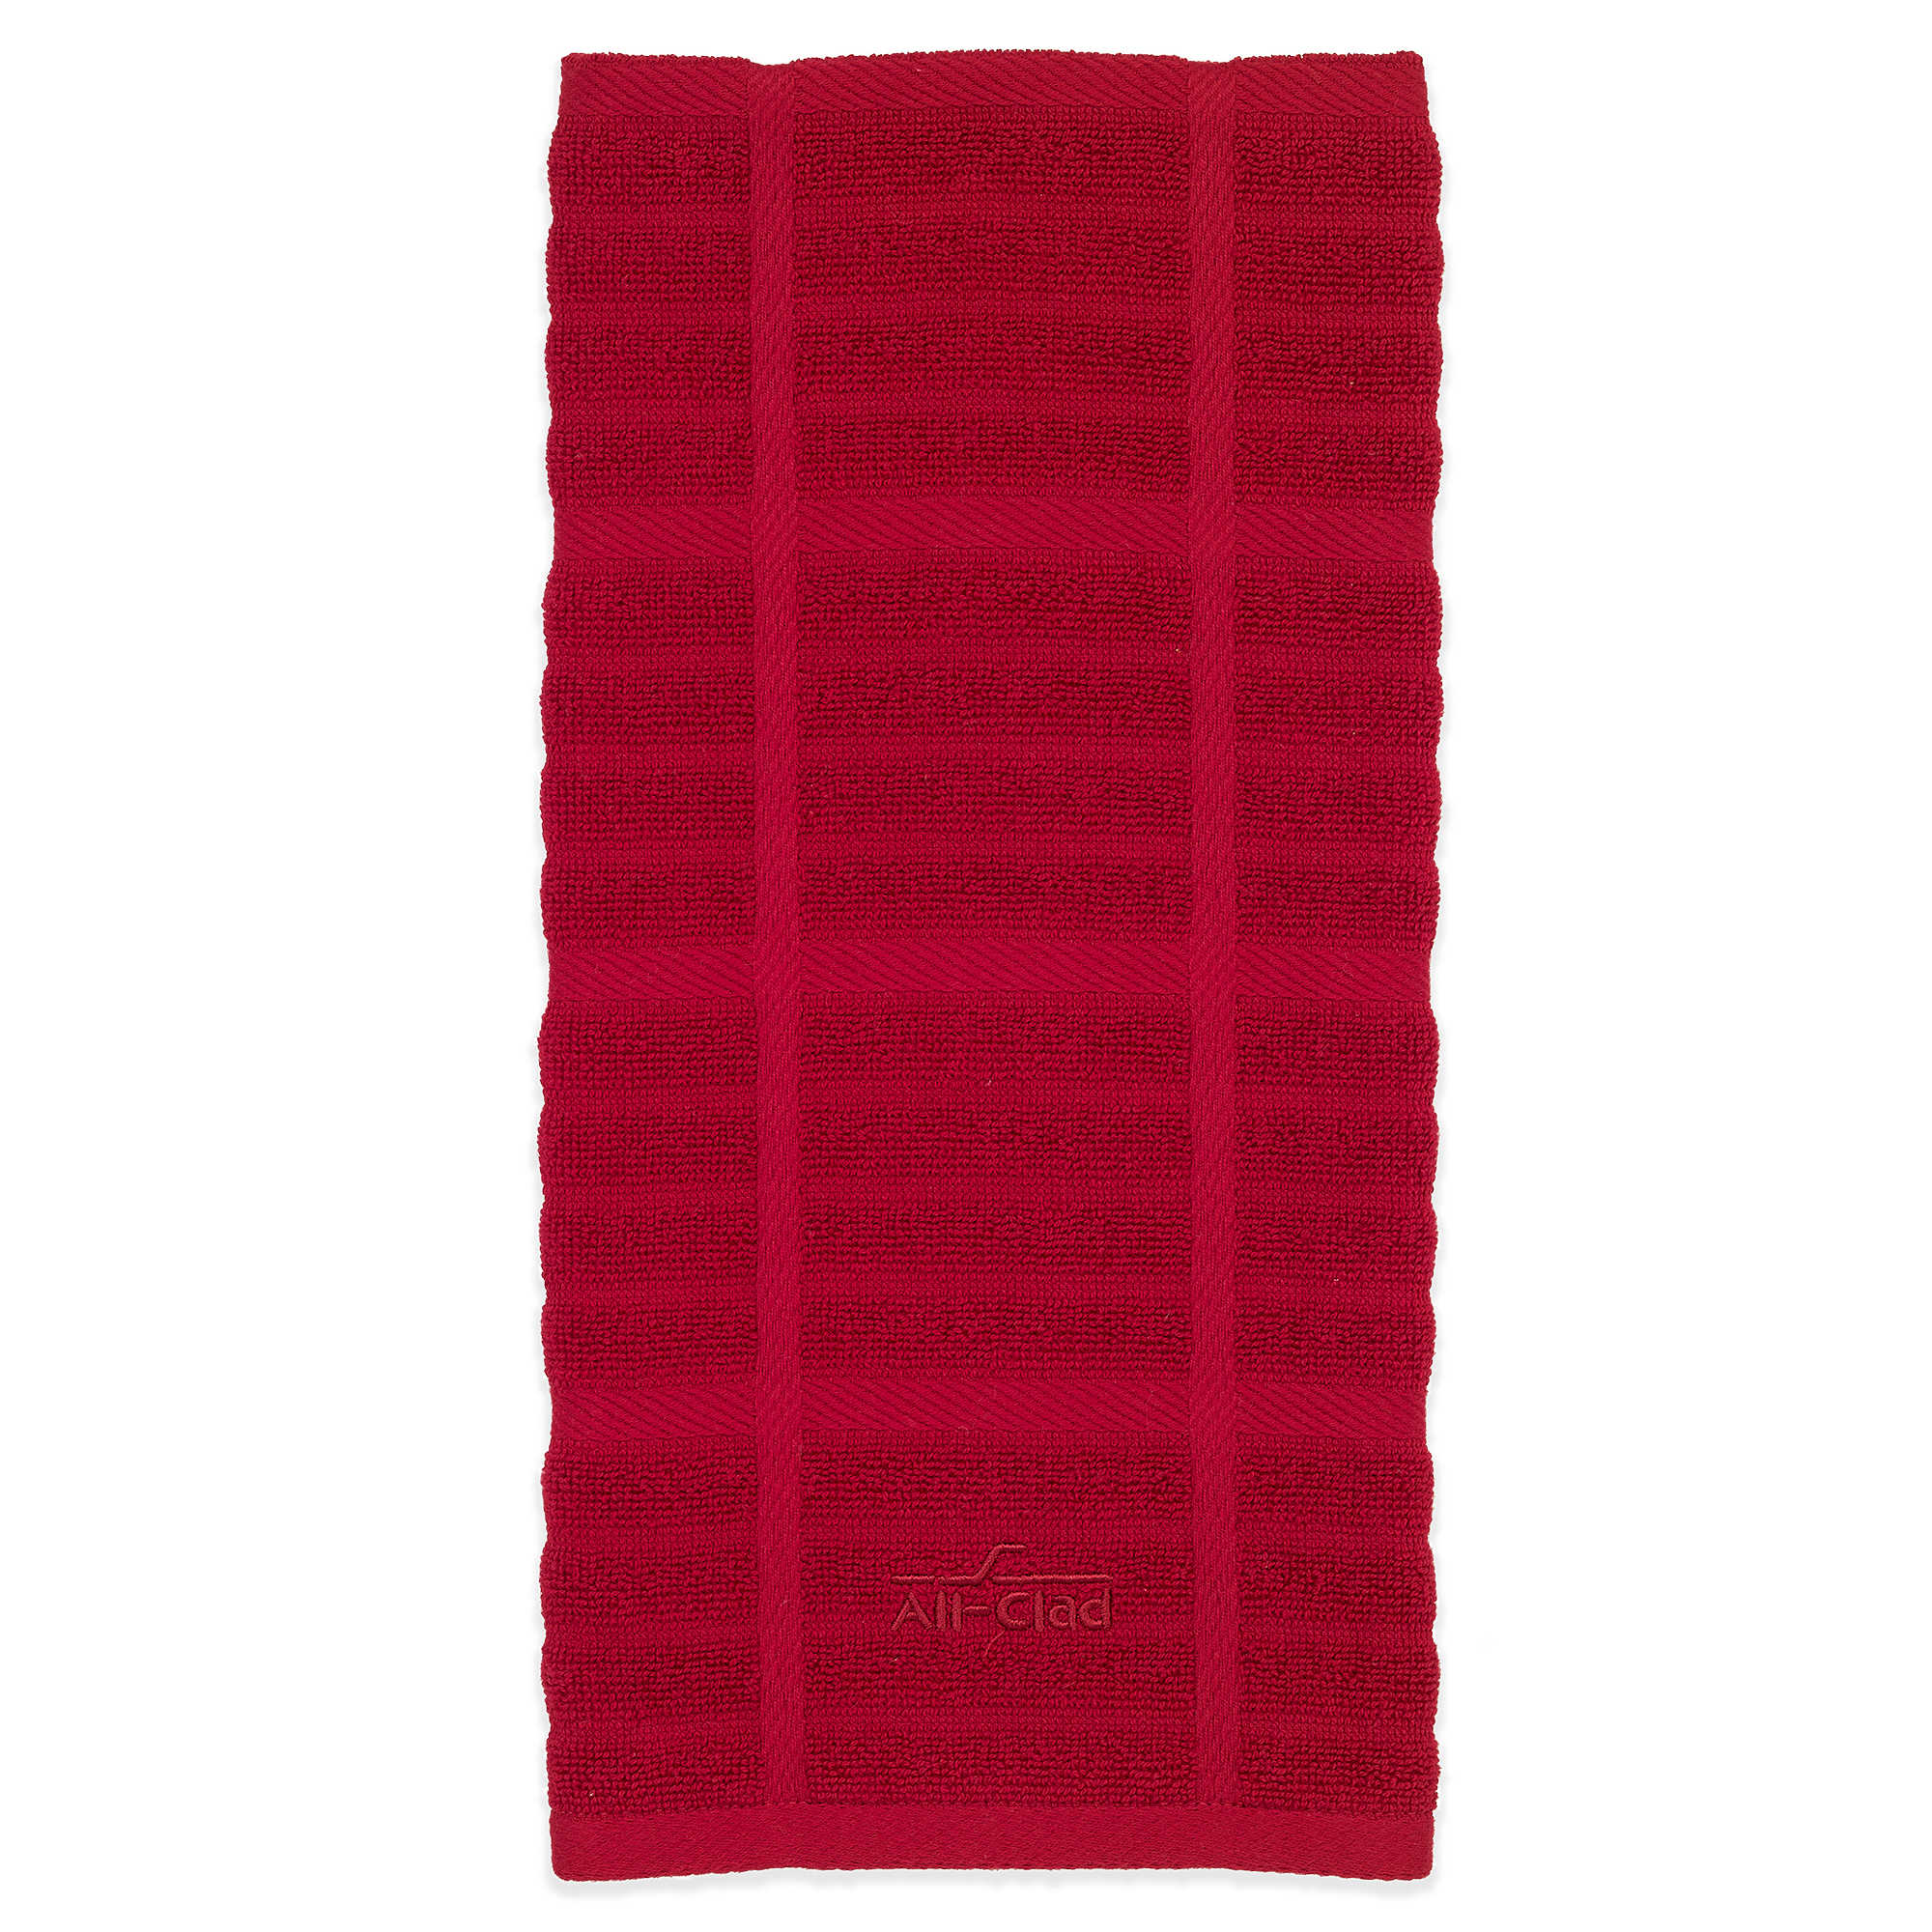 All-Clad Solid Kitchen Towel – Chili